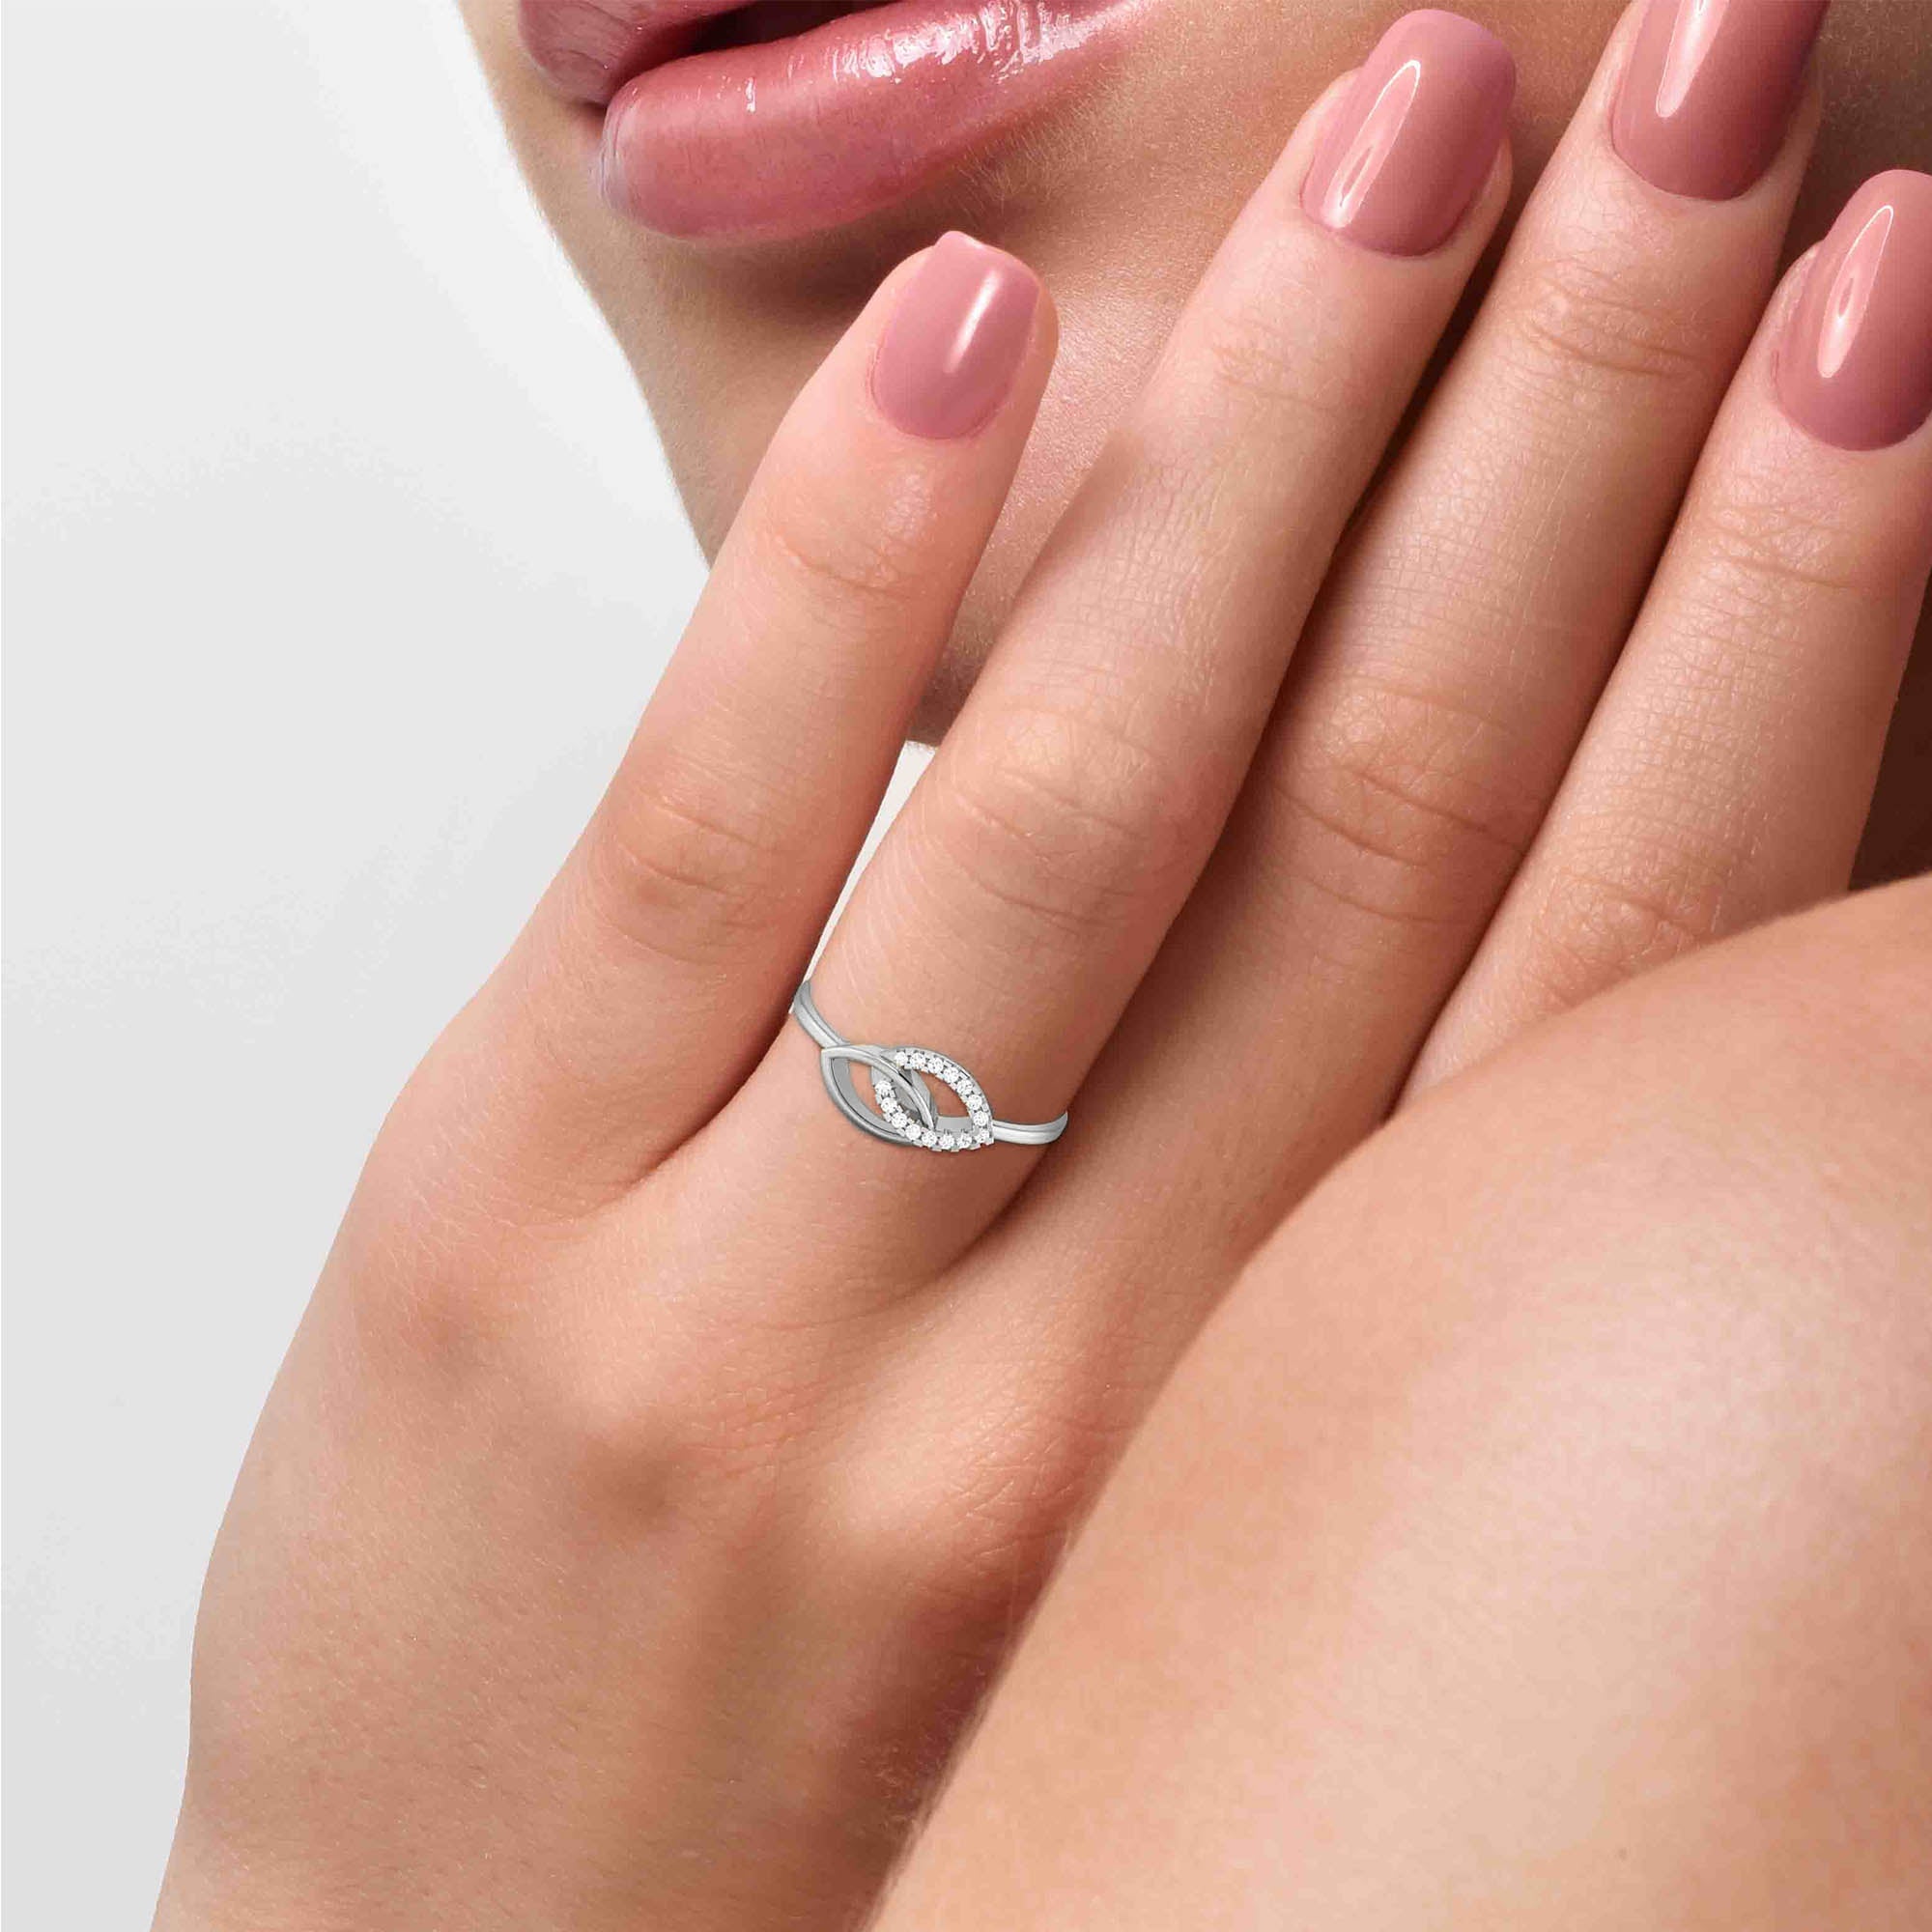 Platinum Rings for Women : Exploring Platinum's Elegance and Price - MOM  News Daily